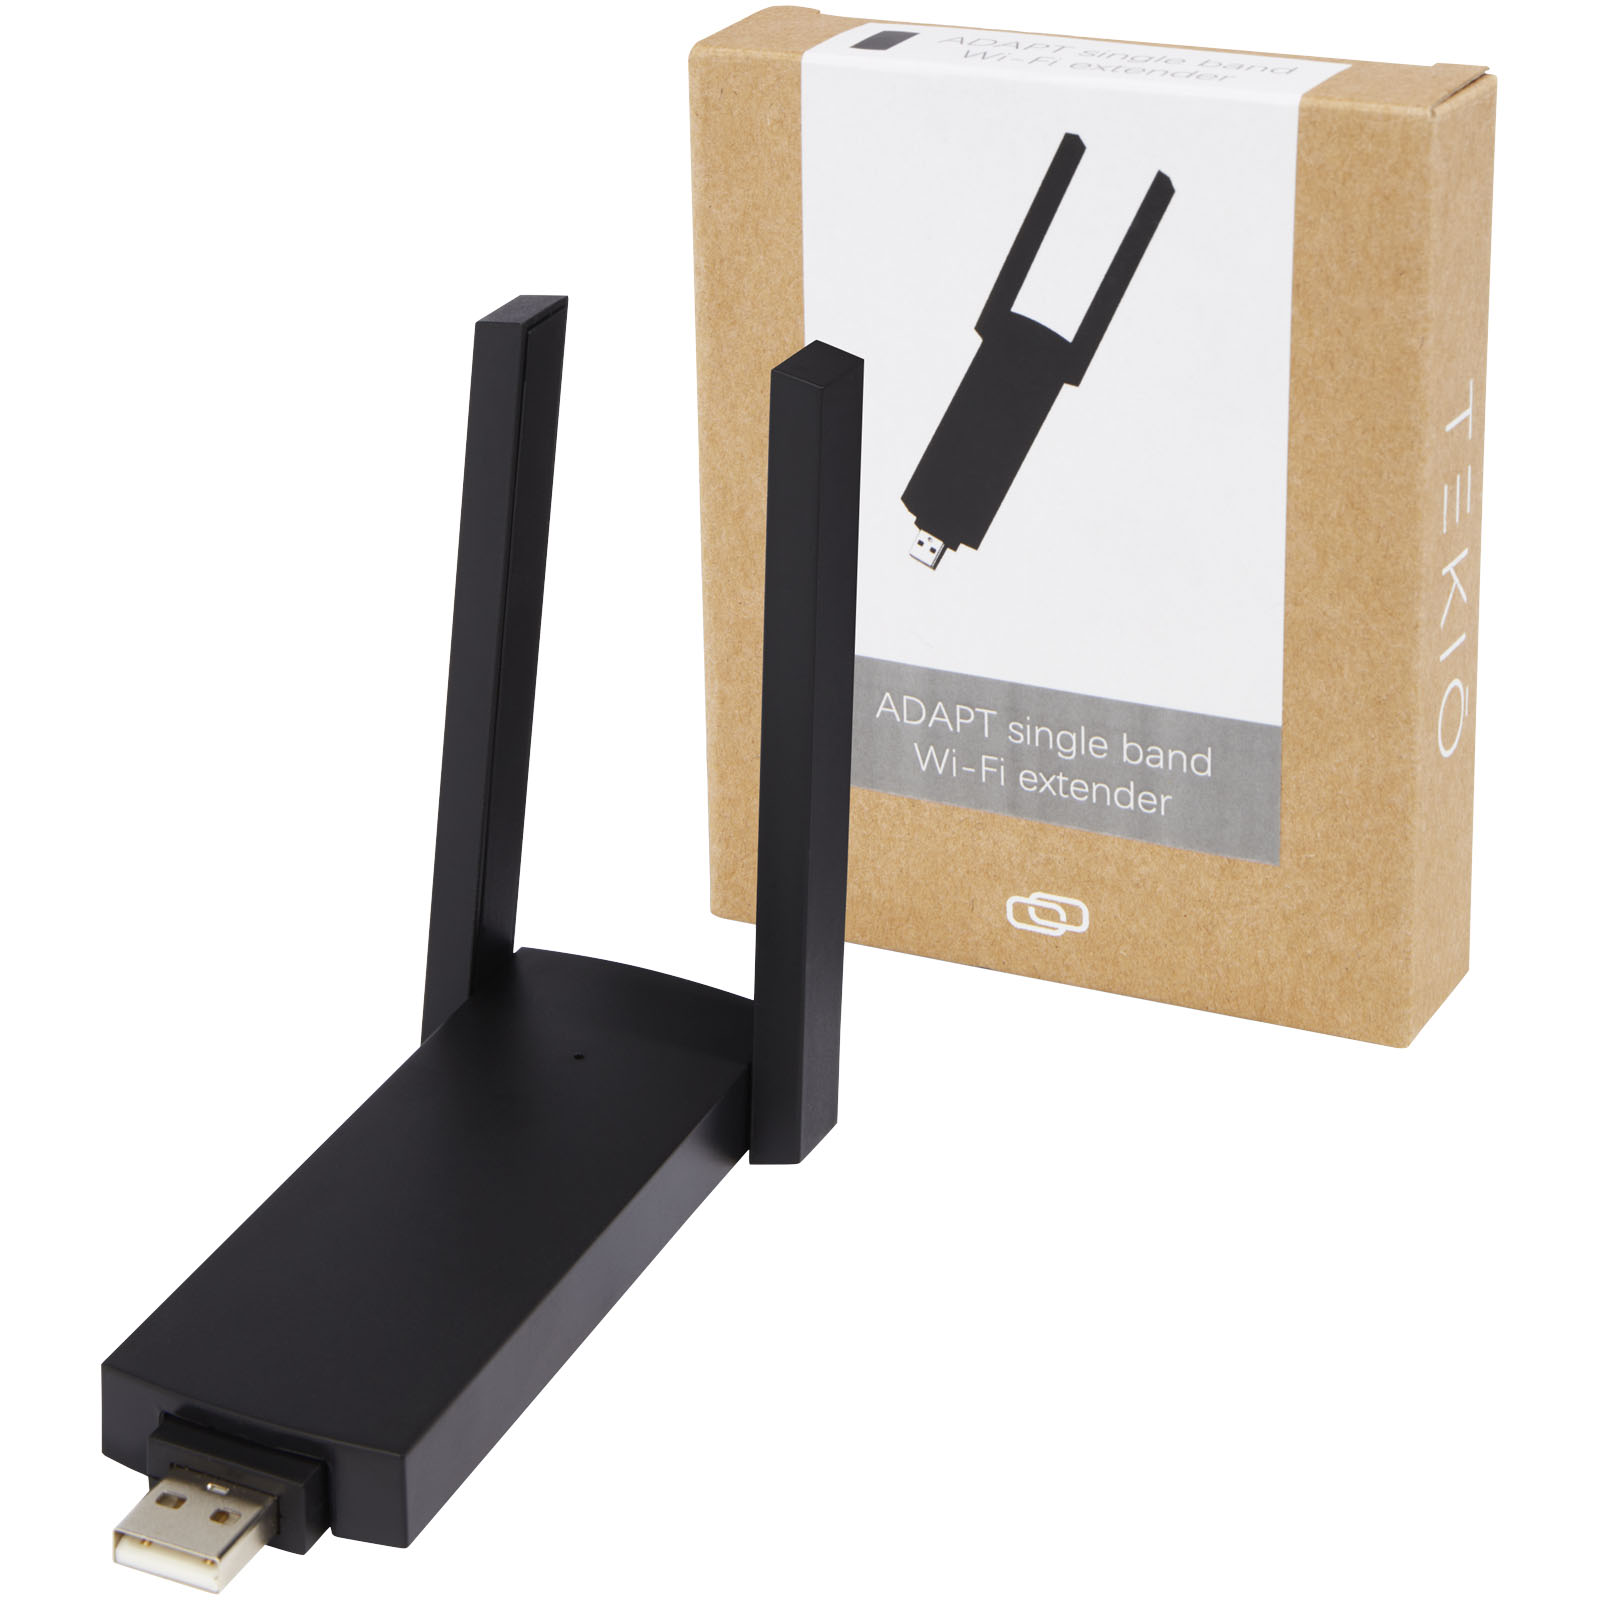 Advertising Computer Accessories - ADAPT single band Wi-Fi extender - 4